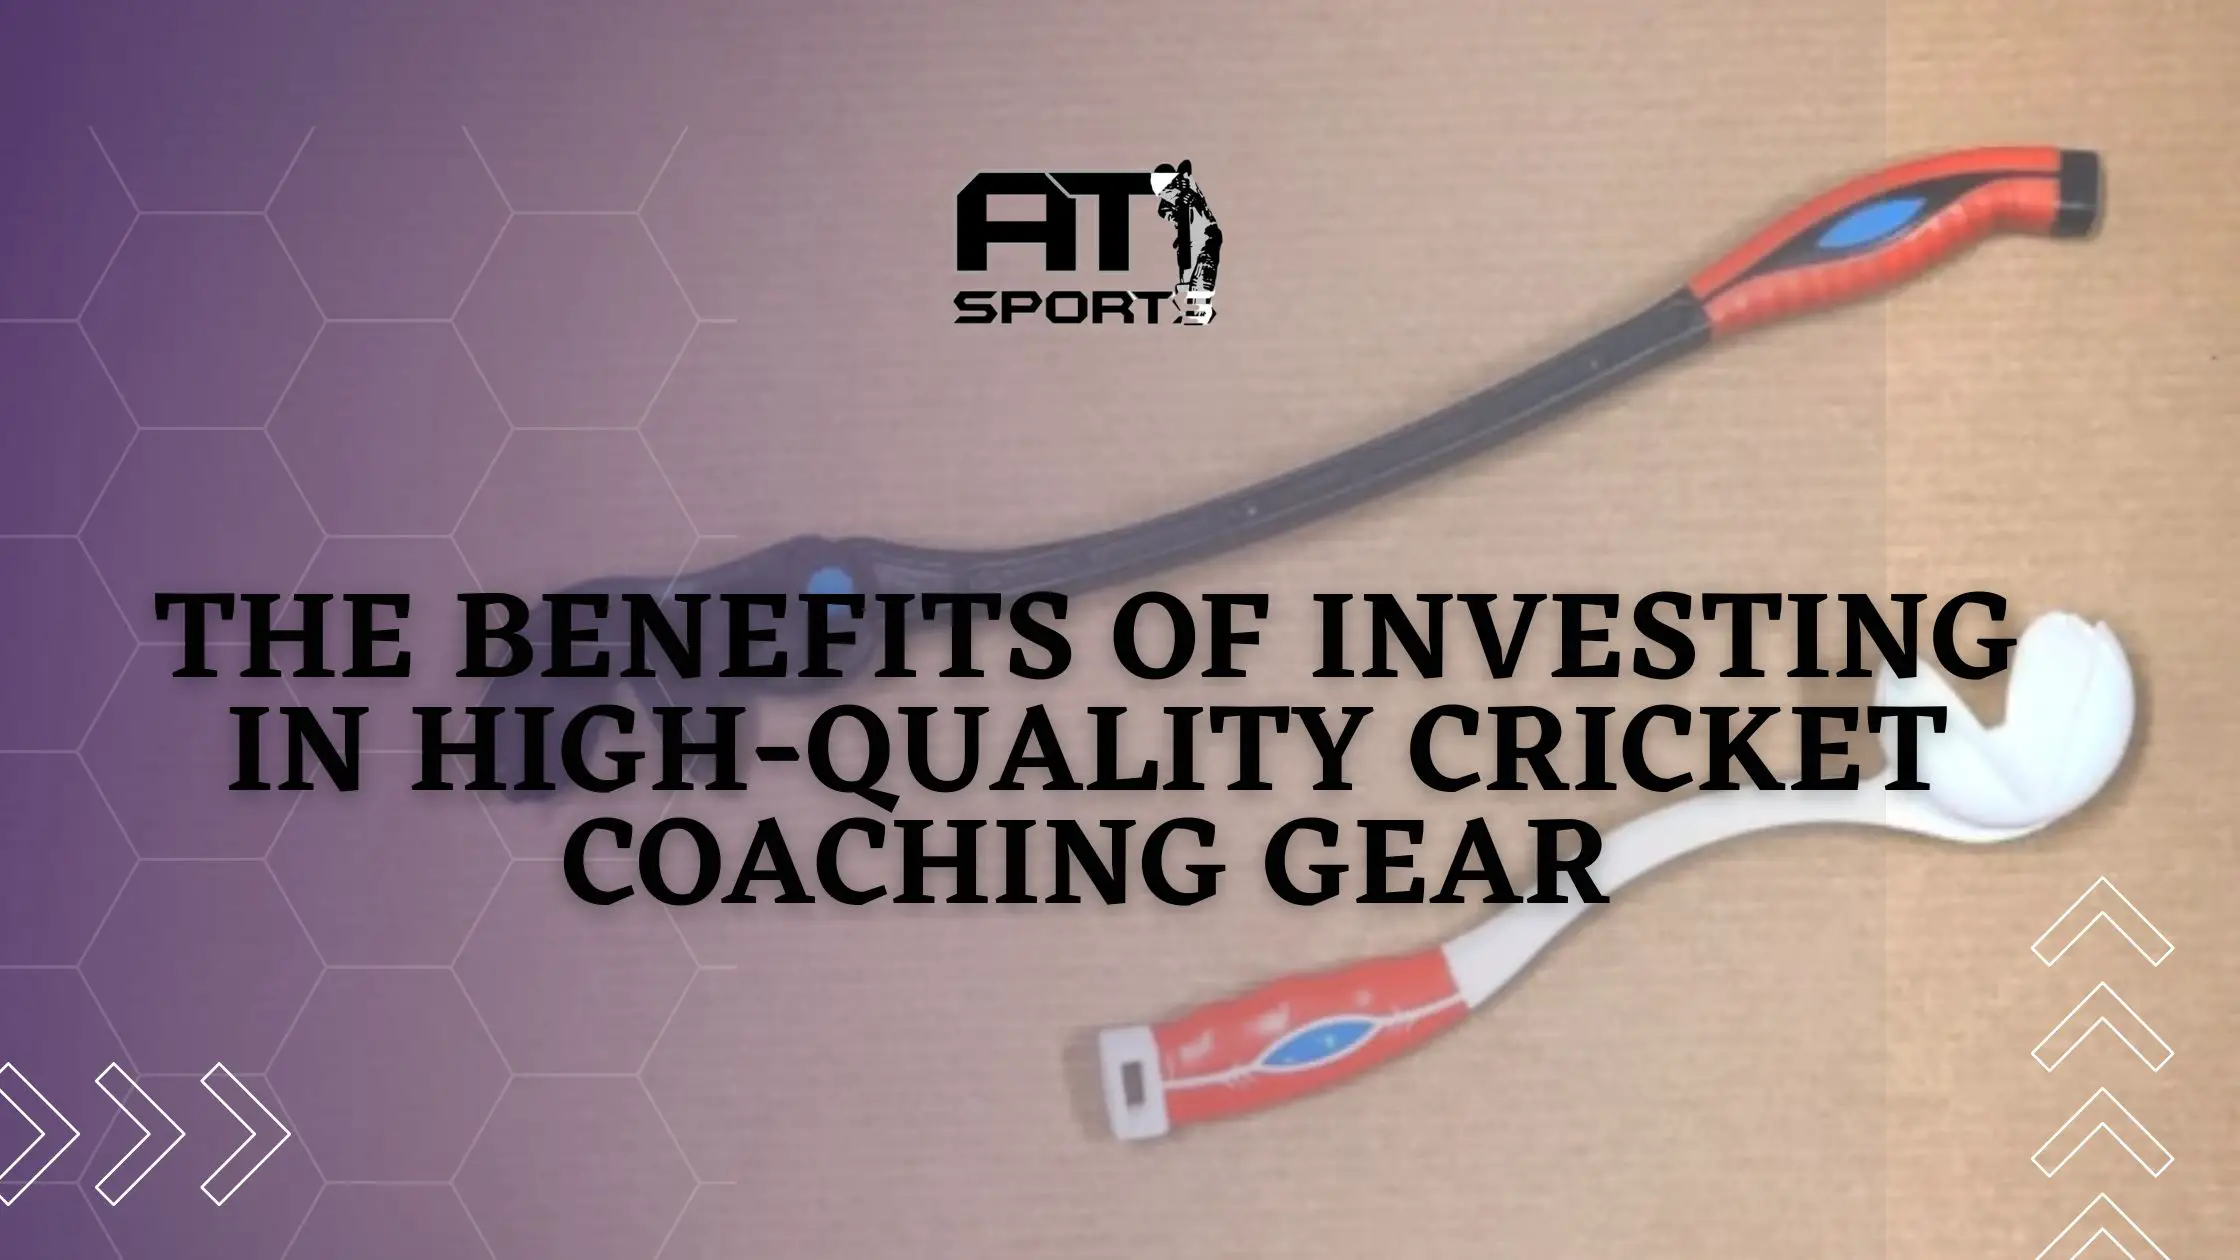 The Benefits of Investing in High-Quality Cricket Coaching Gear